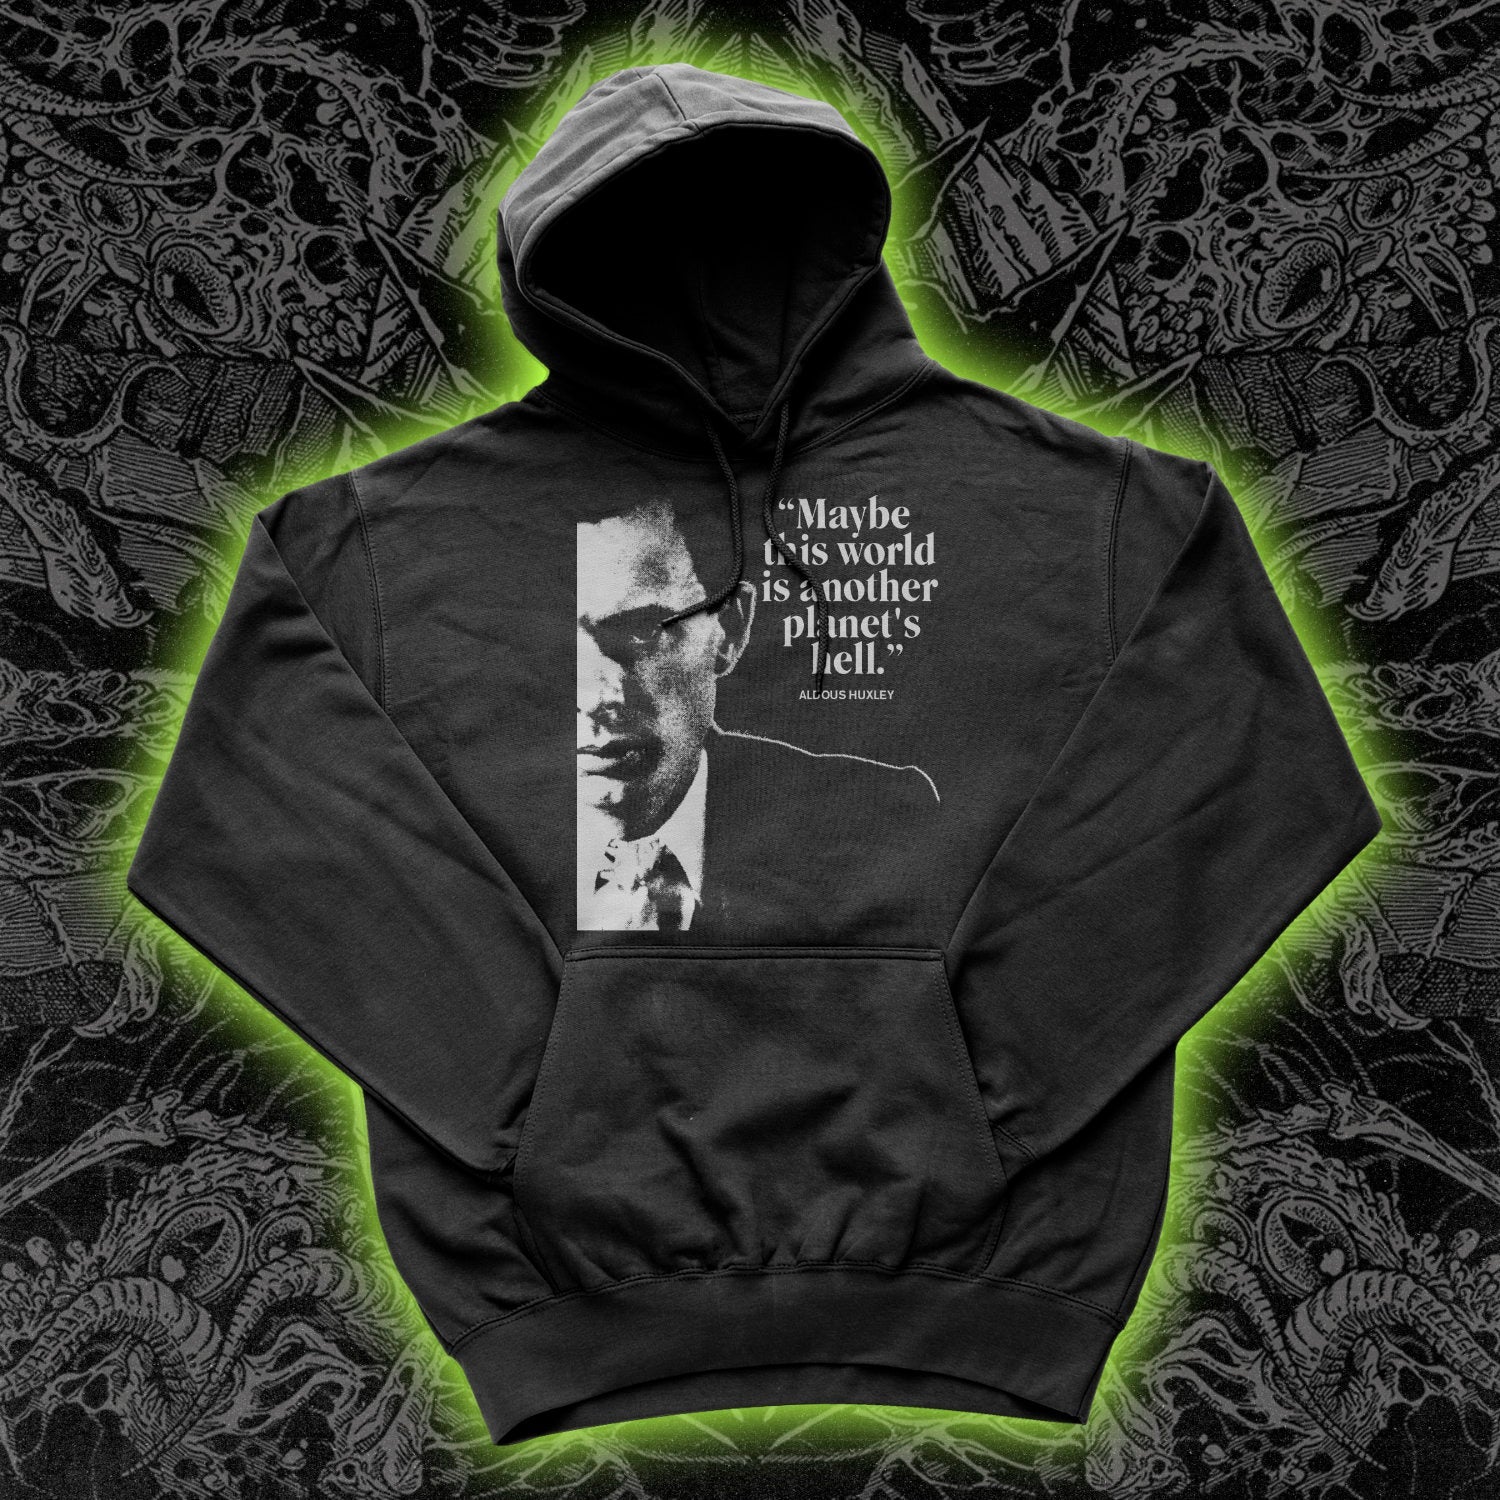 Aldous Huxley Another Planet's Hell Hoodie